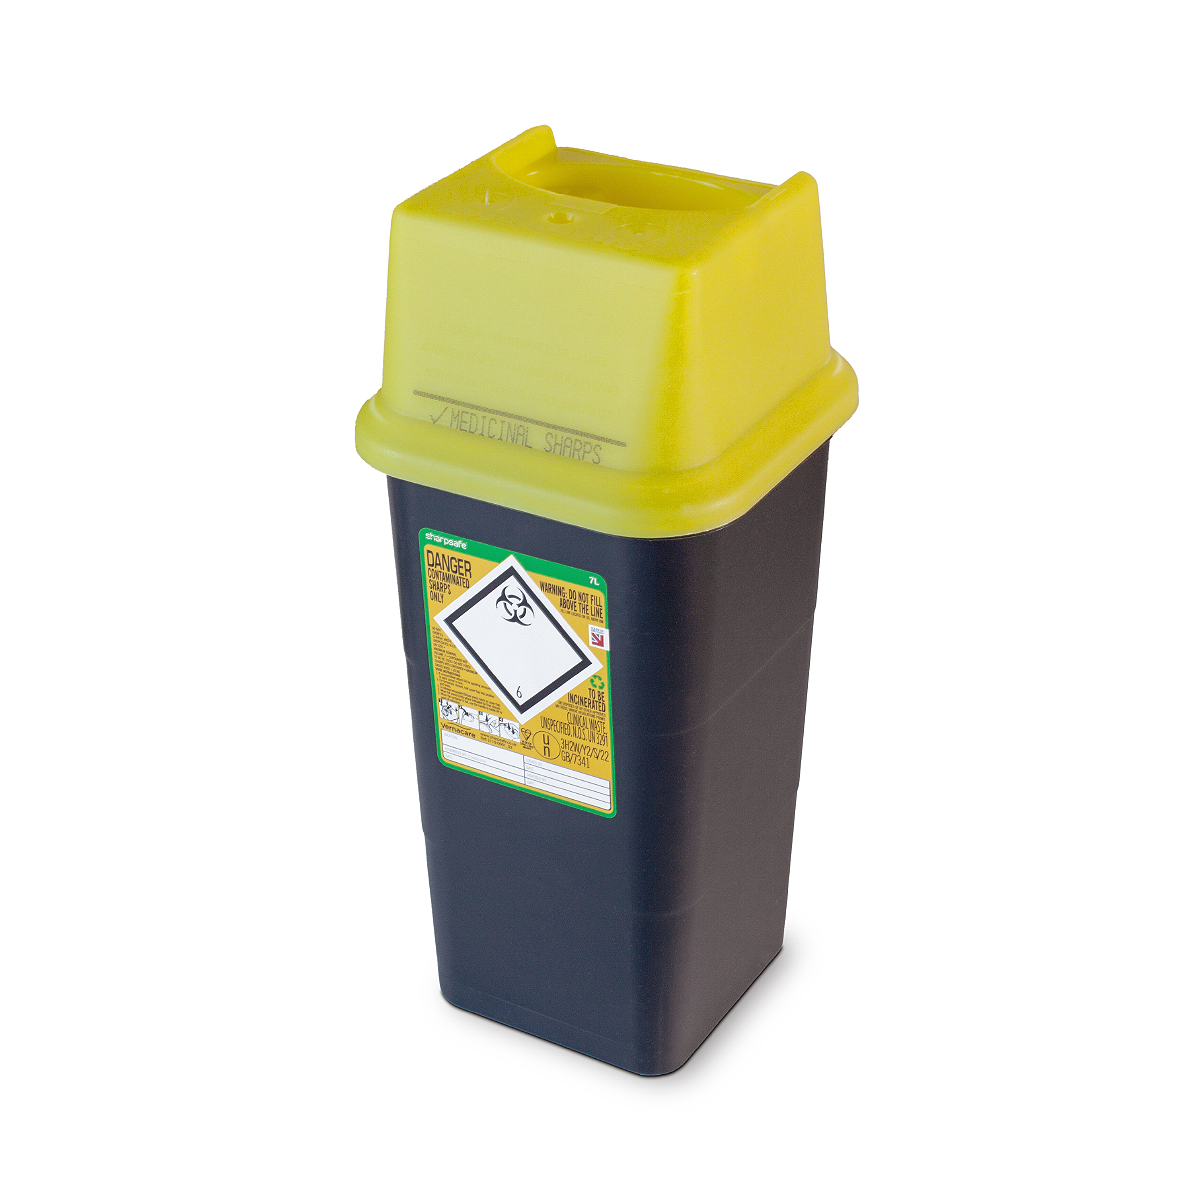 Vernacare 7 litre sharpsafe (Temp out of stock)